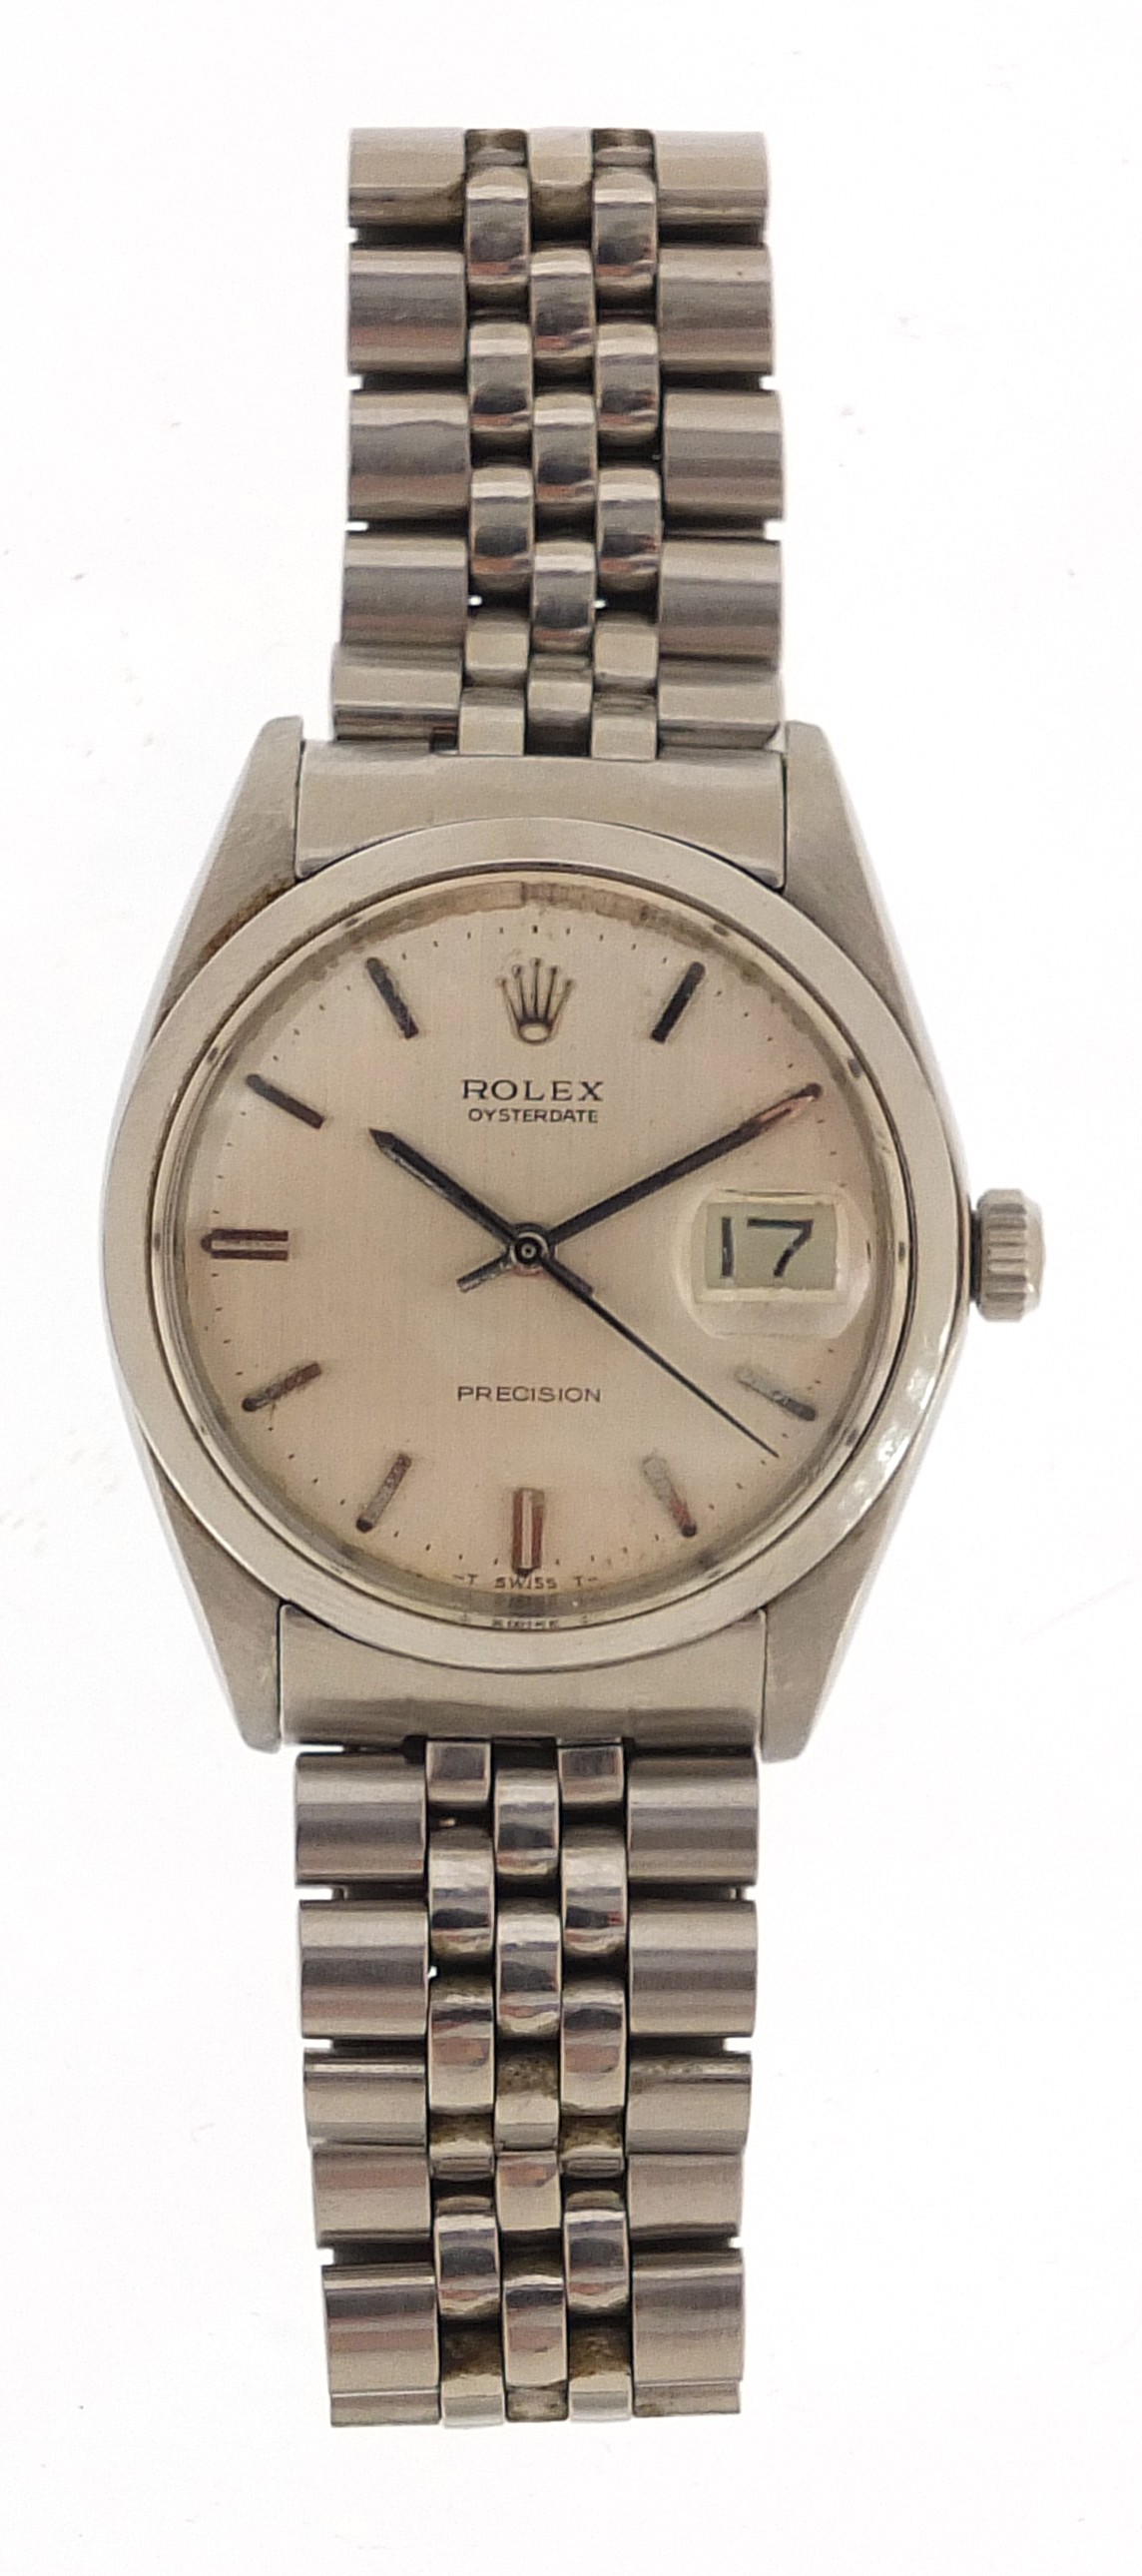 Rolex, gentleman's Oysterdate Precision automatic wristwatch with box, model 6694, serial number - Image 2 of 7